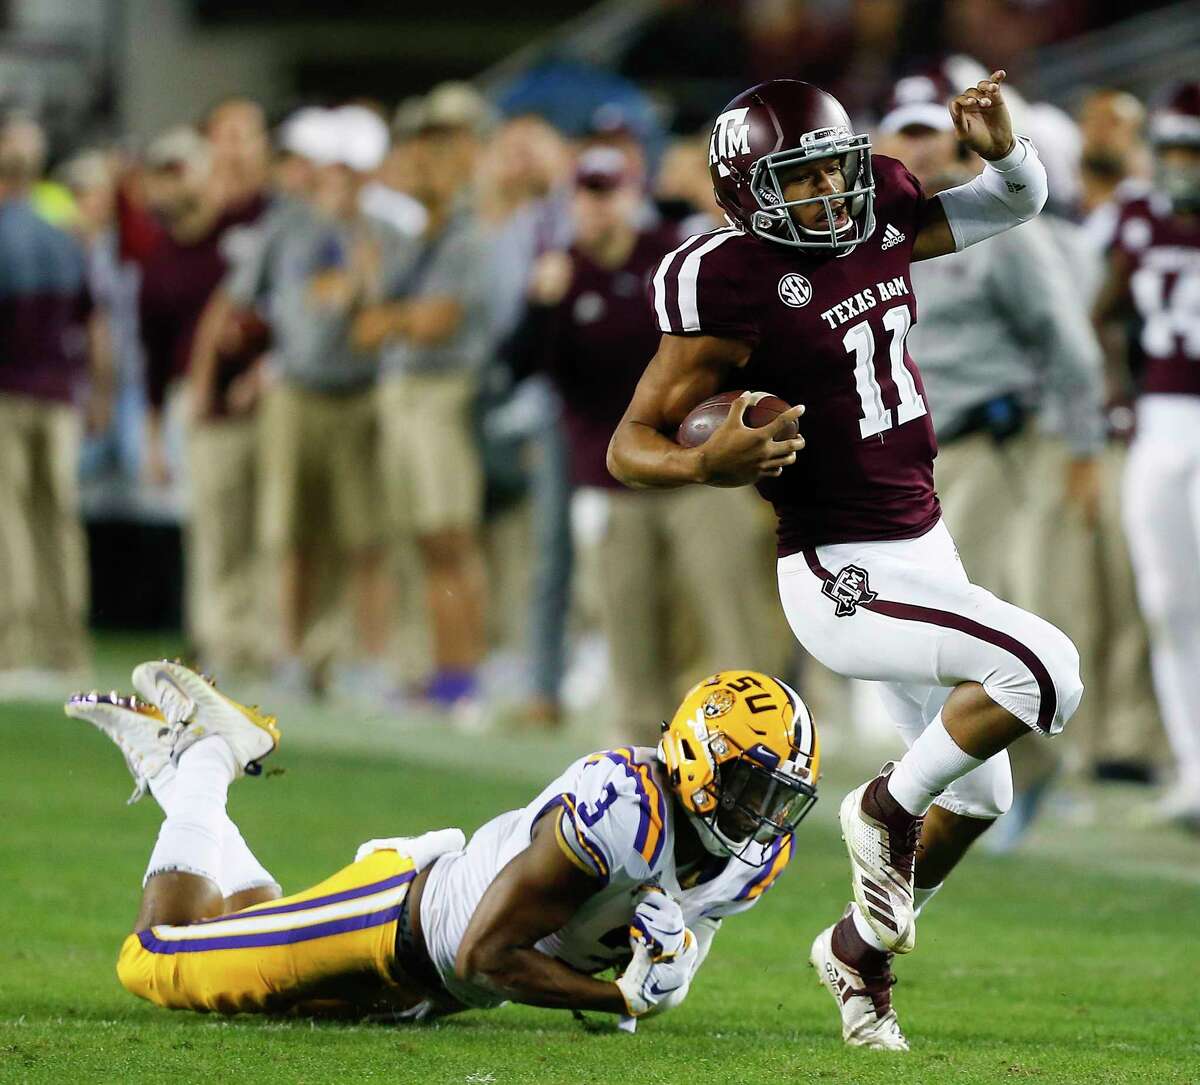 Kellen Mond (11) of the Texas A&M Aggies slips the tackle attempt by JaCoby Stevens of the LSU Tigers in the first half at Kyle Field on Nov. 24, 2018 in College Station.